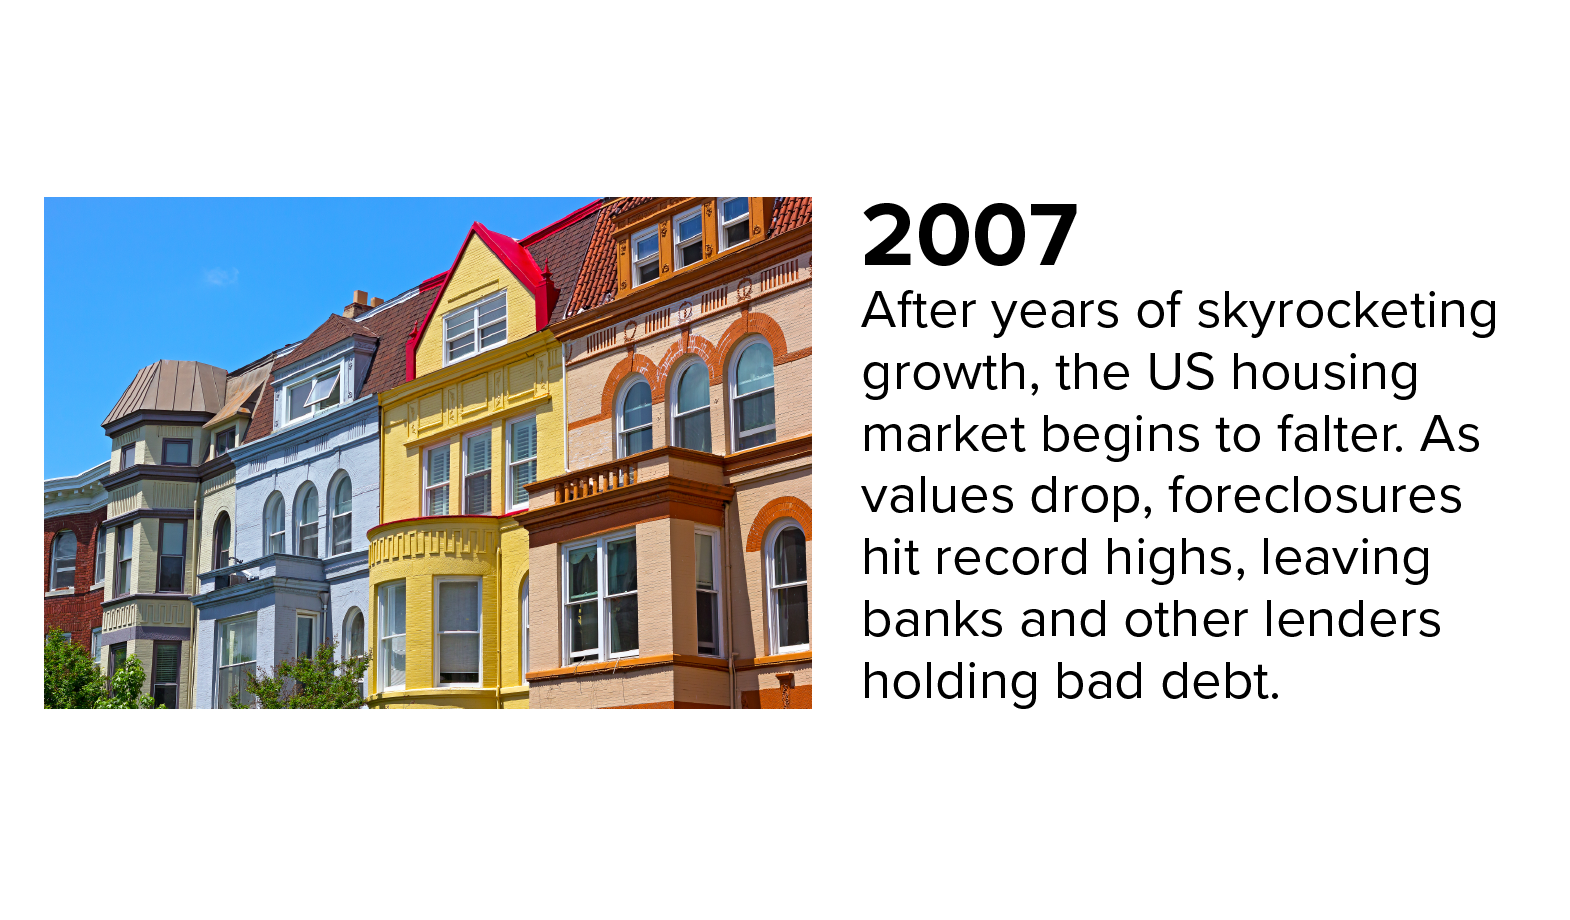 Photo of row houses illustrating booming housing market in early 2000s. By 2007, housing prices were falling.